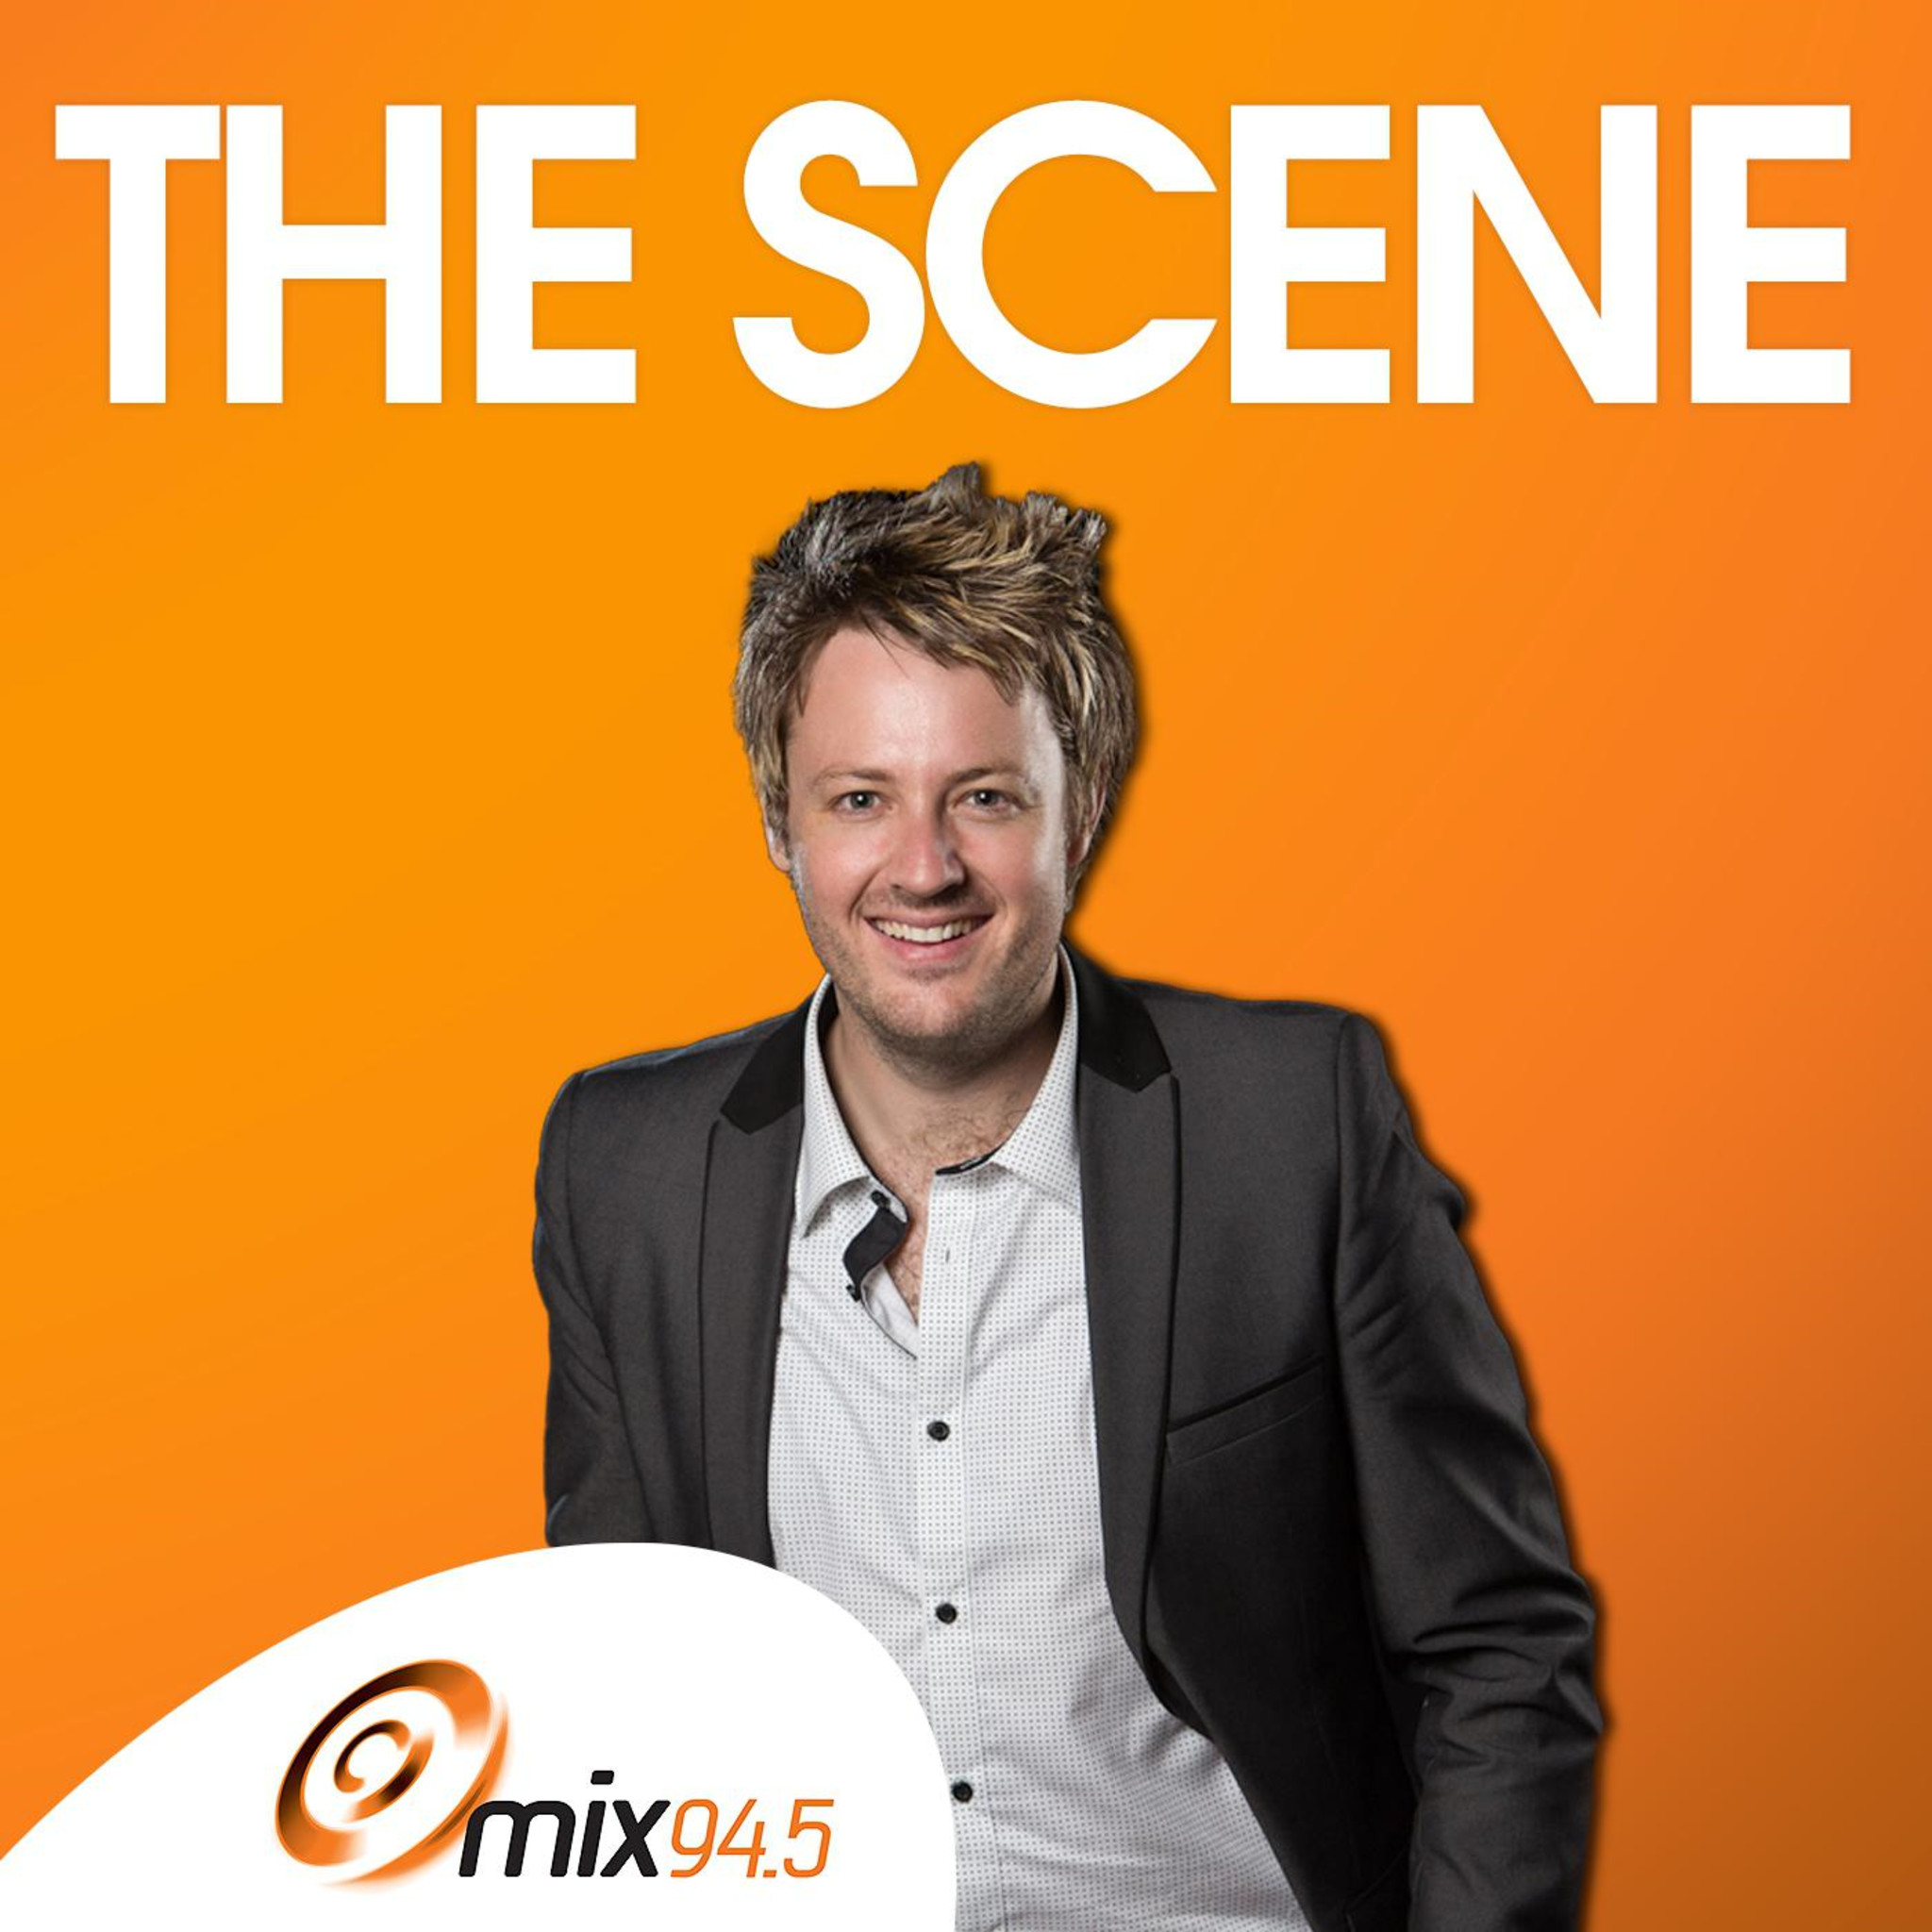 #thescene / Show 257 / Steve Hensby